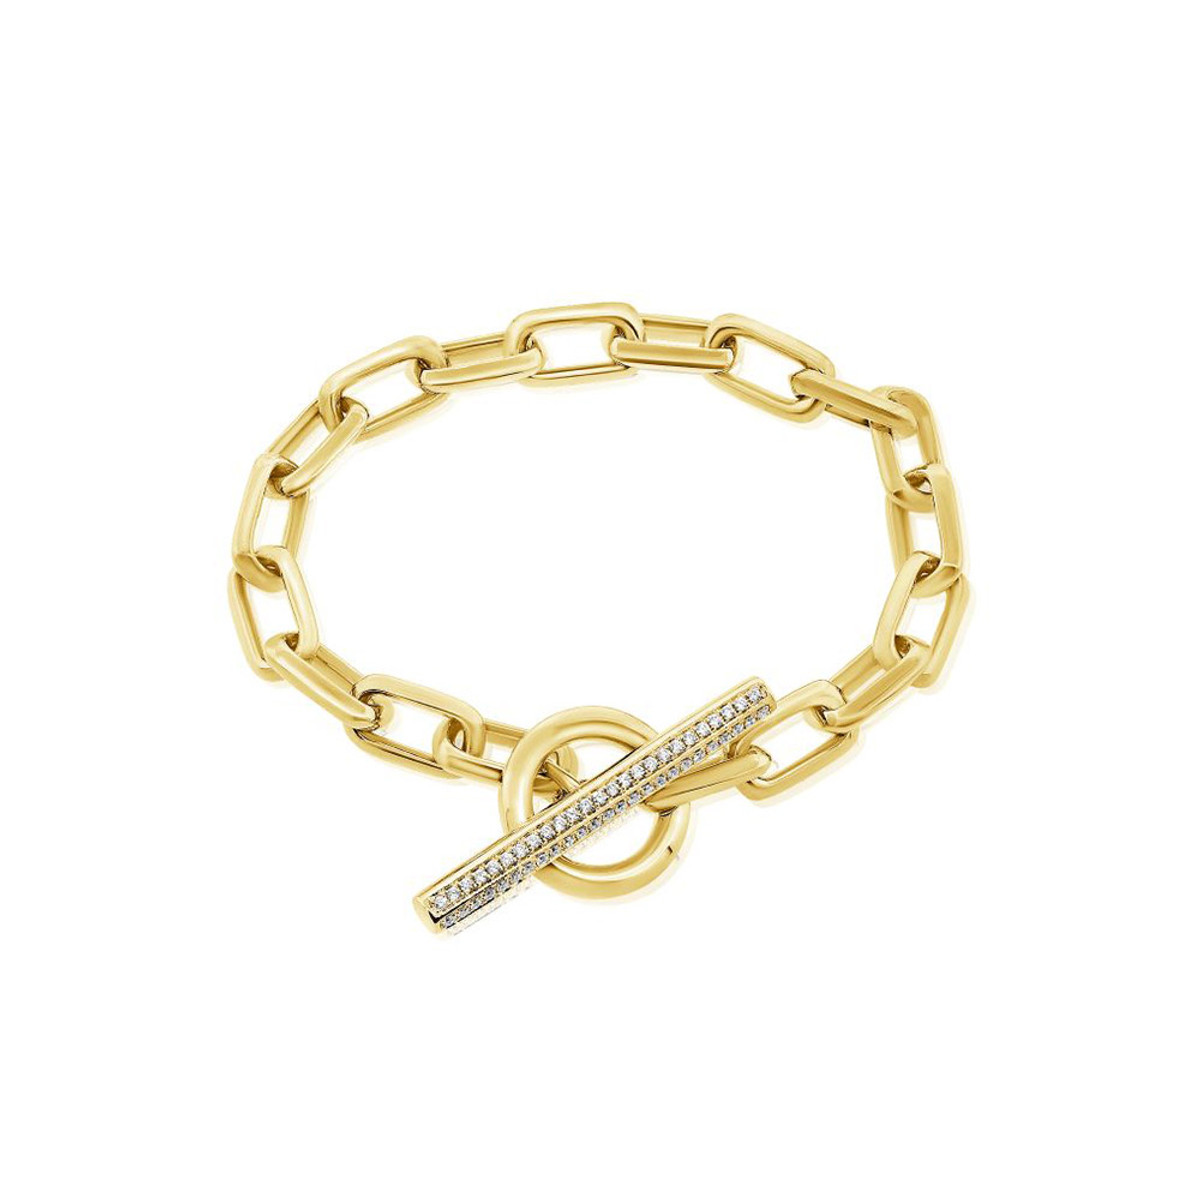 Hyde Park Collection 14K Yellow Gold Diamond Toggle Link Bracelet-38319 Product Image